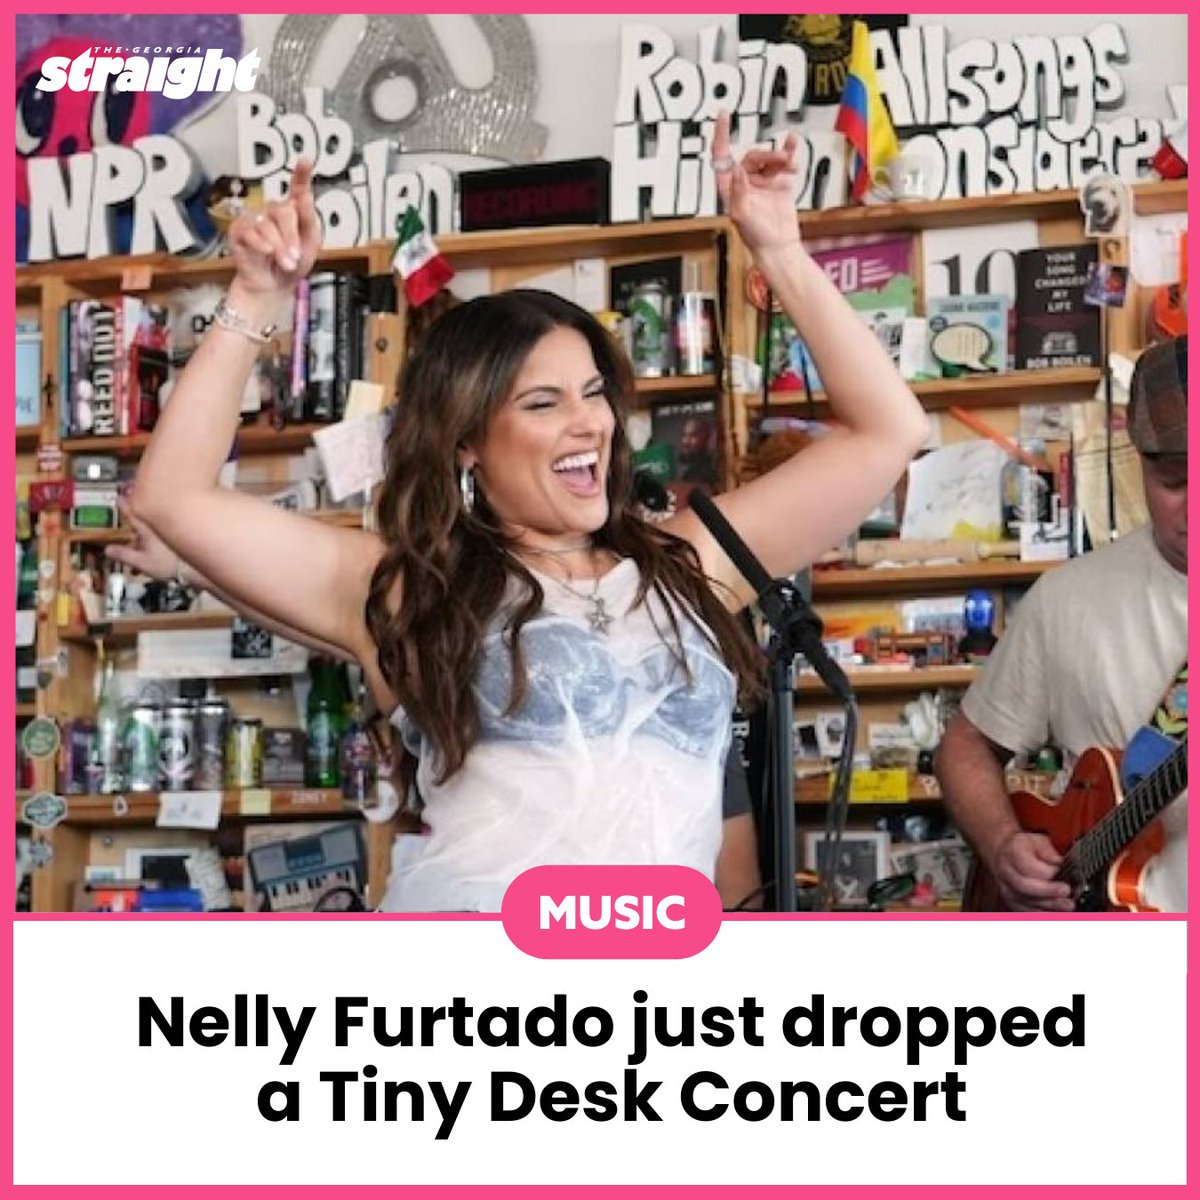 The Maneater herself made an appearance on NPR's Tiny Desk concert series. Watch the performance: straight.com/music/nelly-fu…